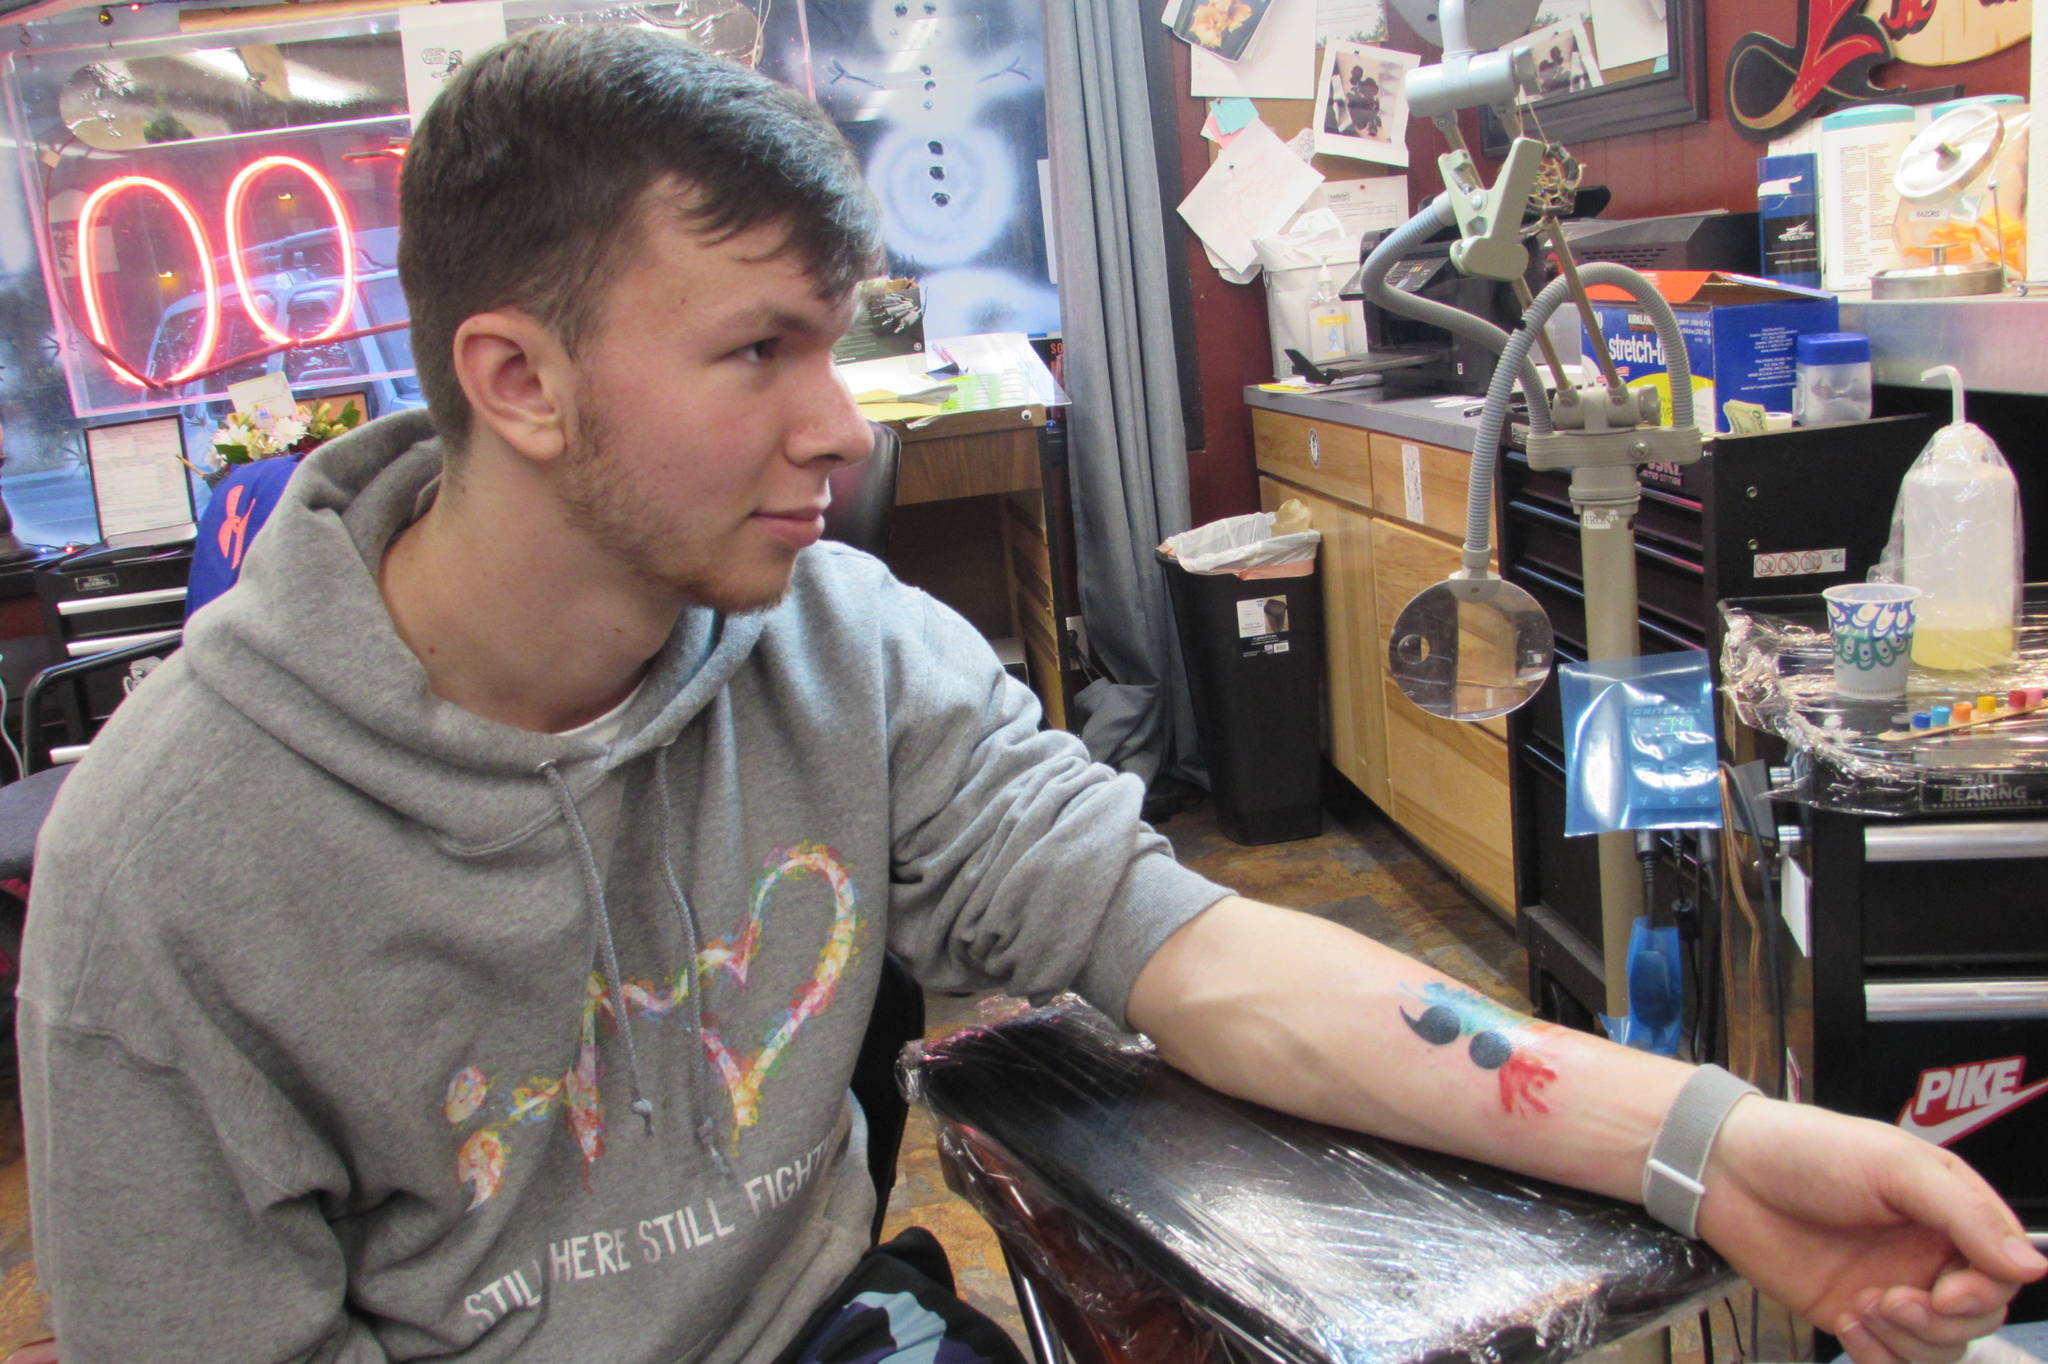 Jonathan Funk was happy with his first-ever tattoo. The semicolon’s water color color splashes were similar to the design on the hoodie he wore. (Ben Hohenstatt | Capital City Weekly)